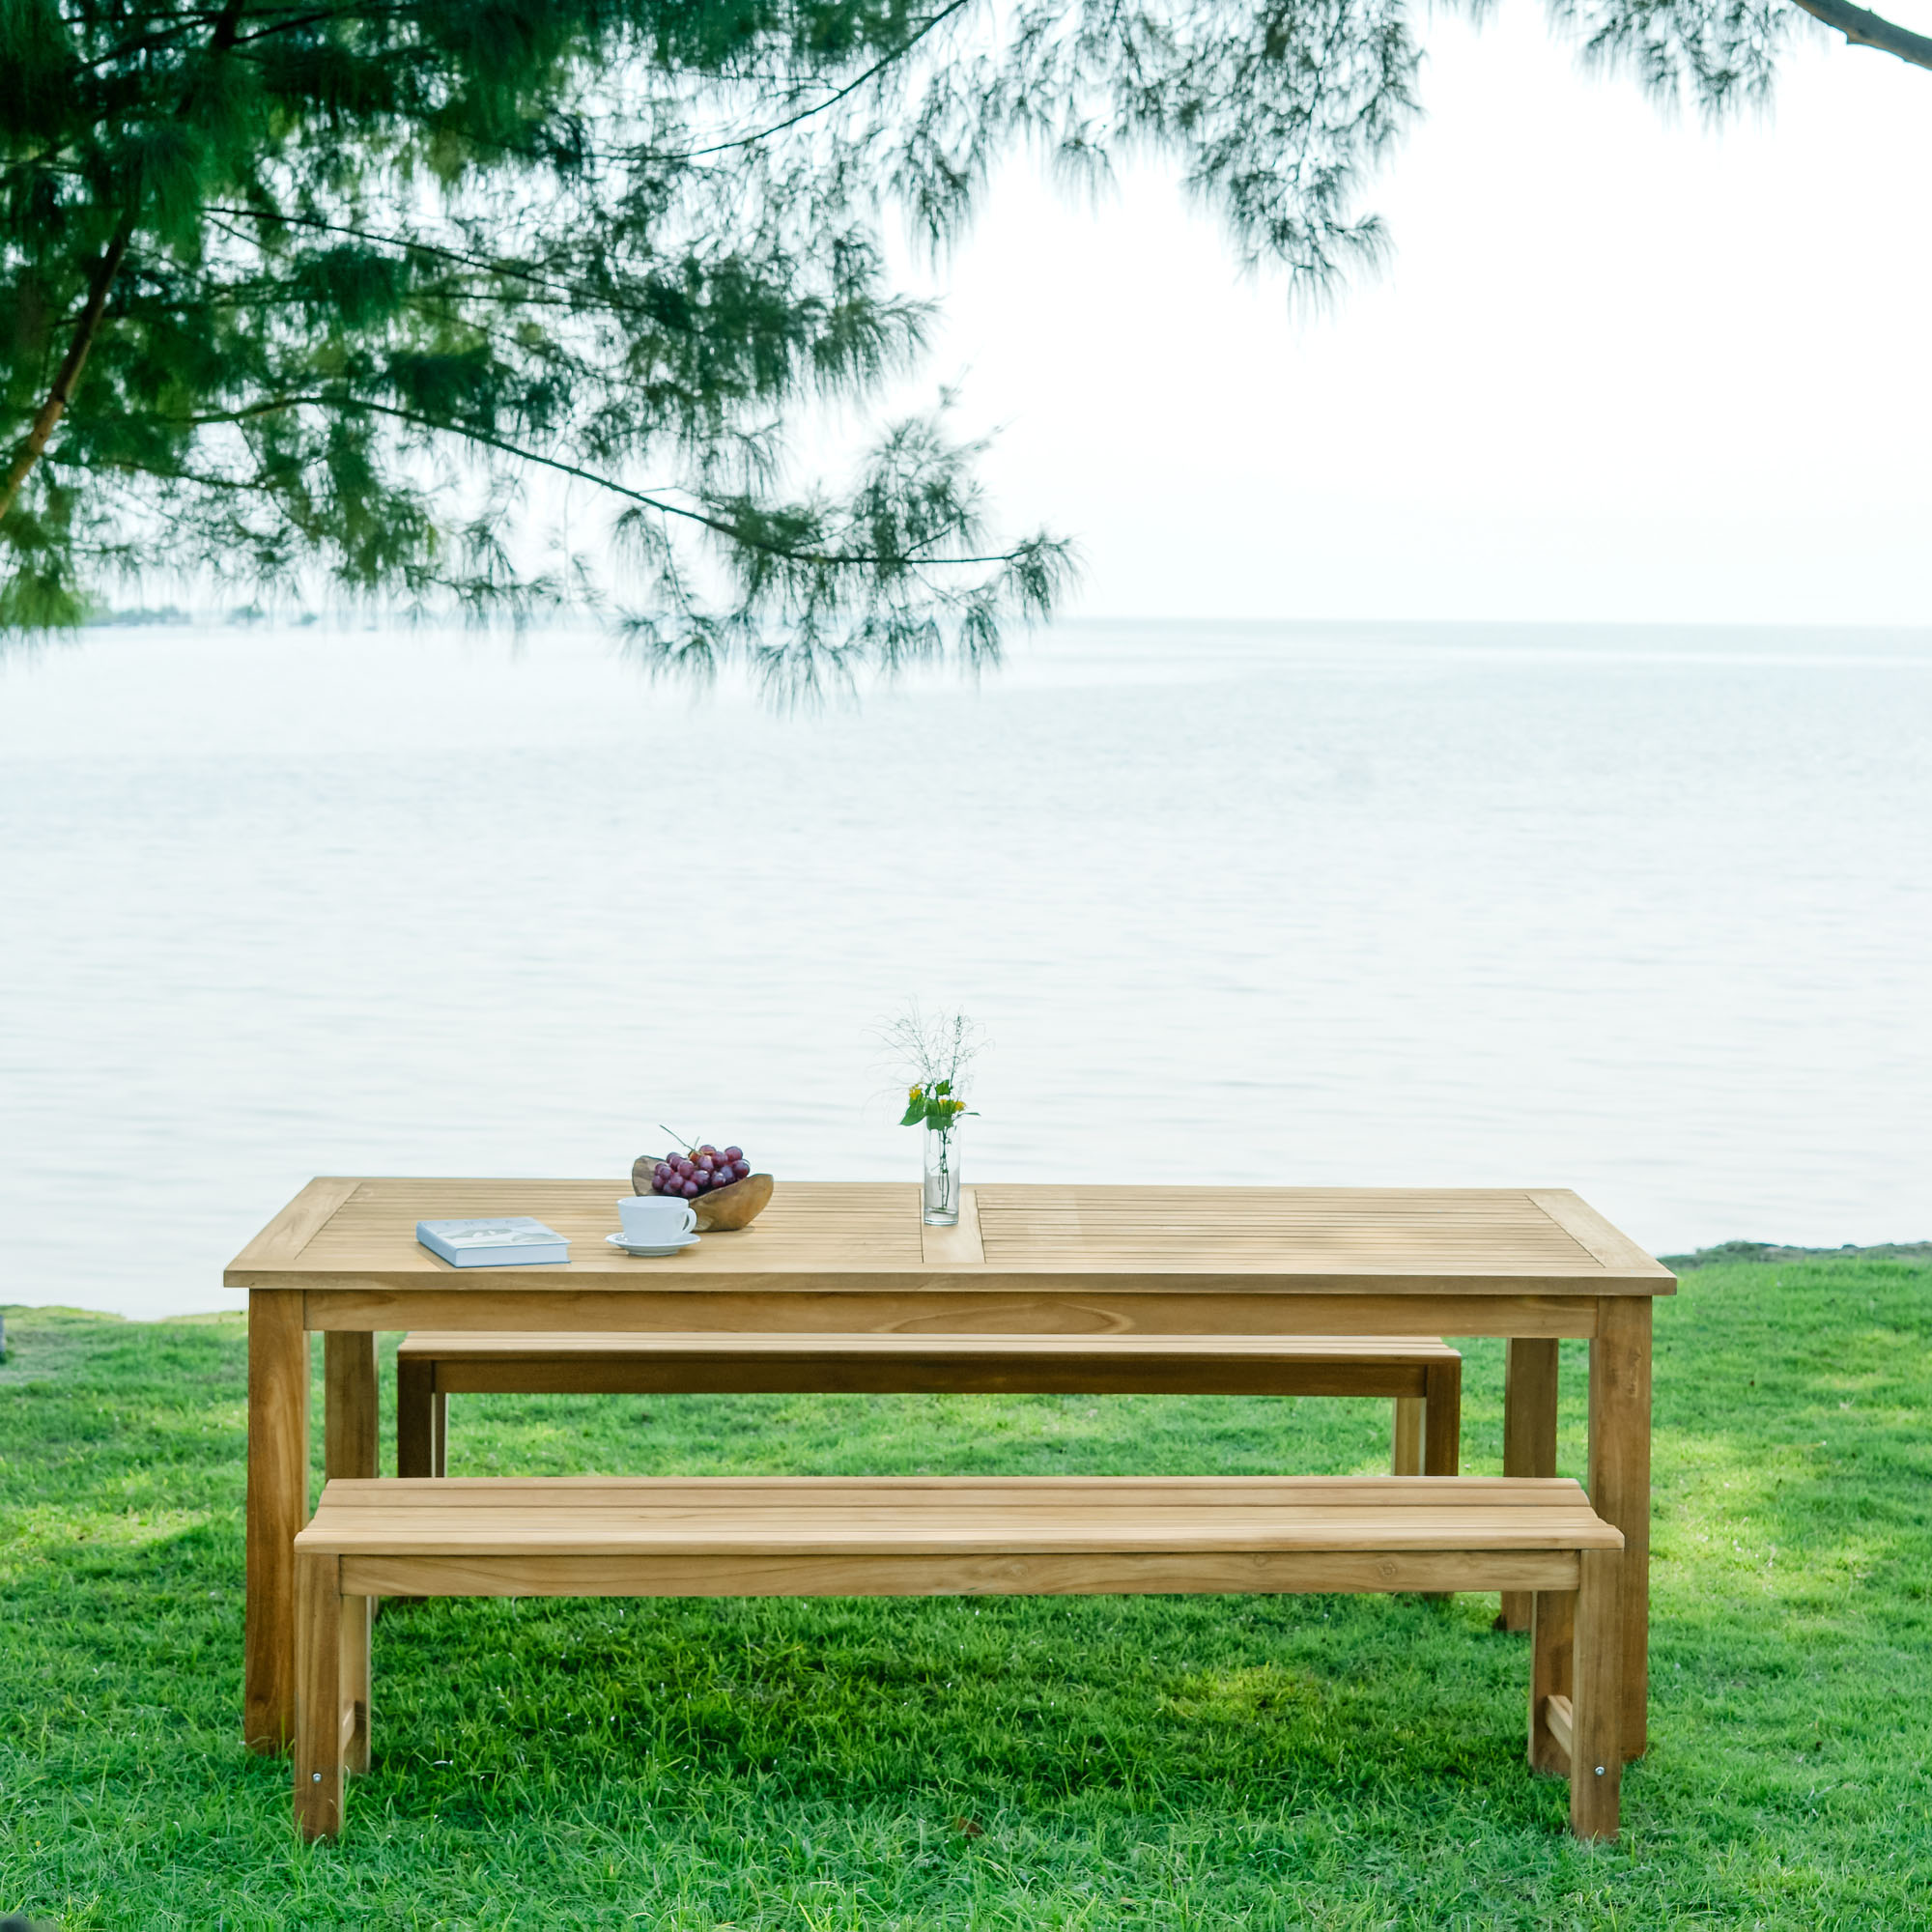 Balmoral Outdoor Teak Dining table + Bench a on grass by water